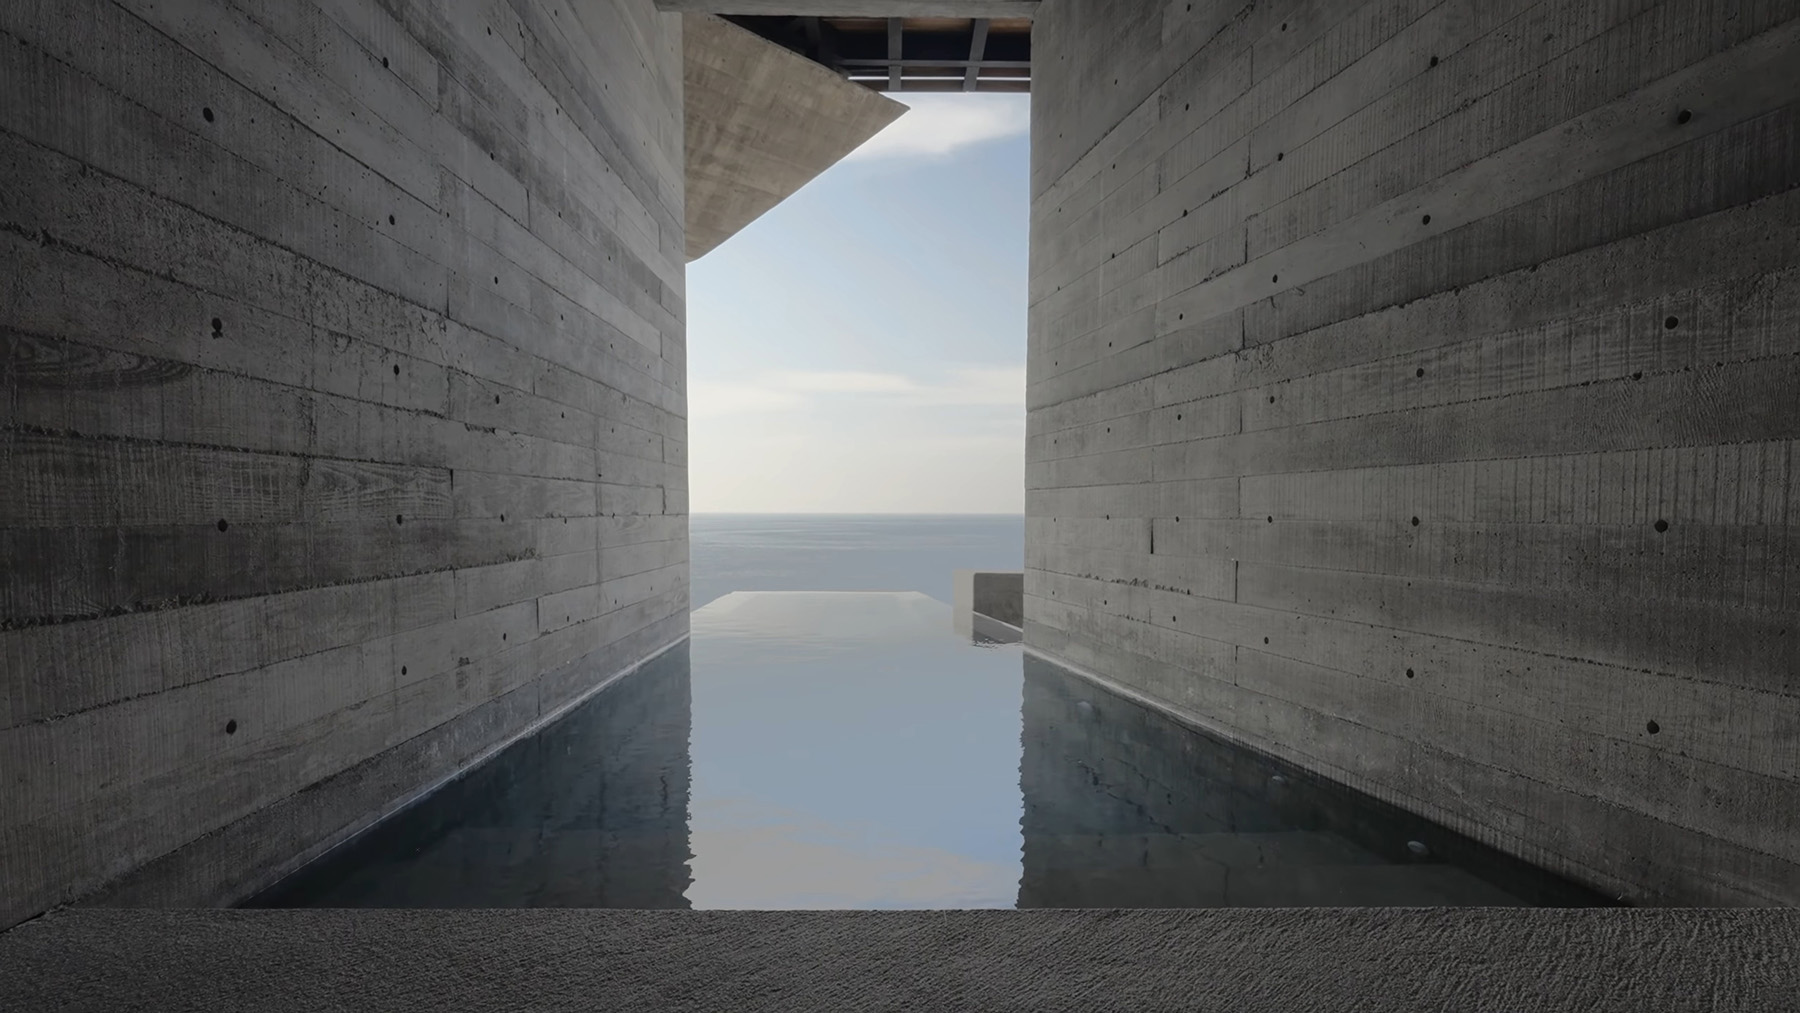 Horizontal board form used on the walls of this stunning modern pool.